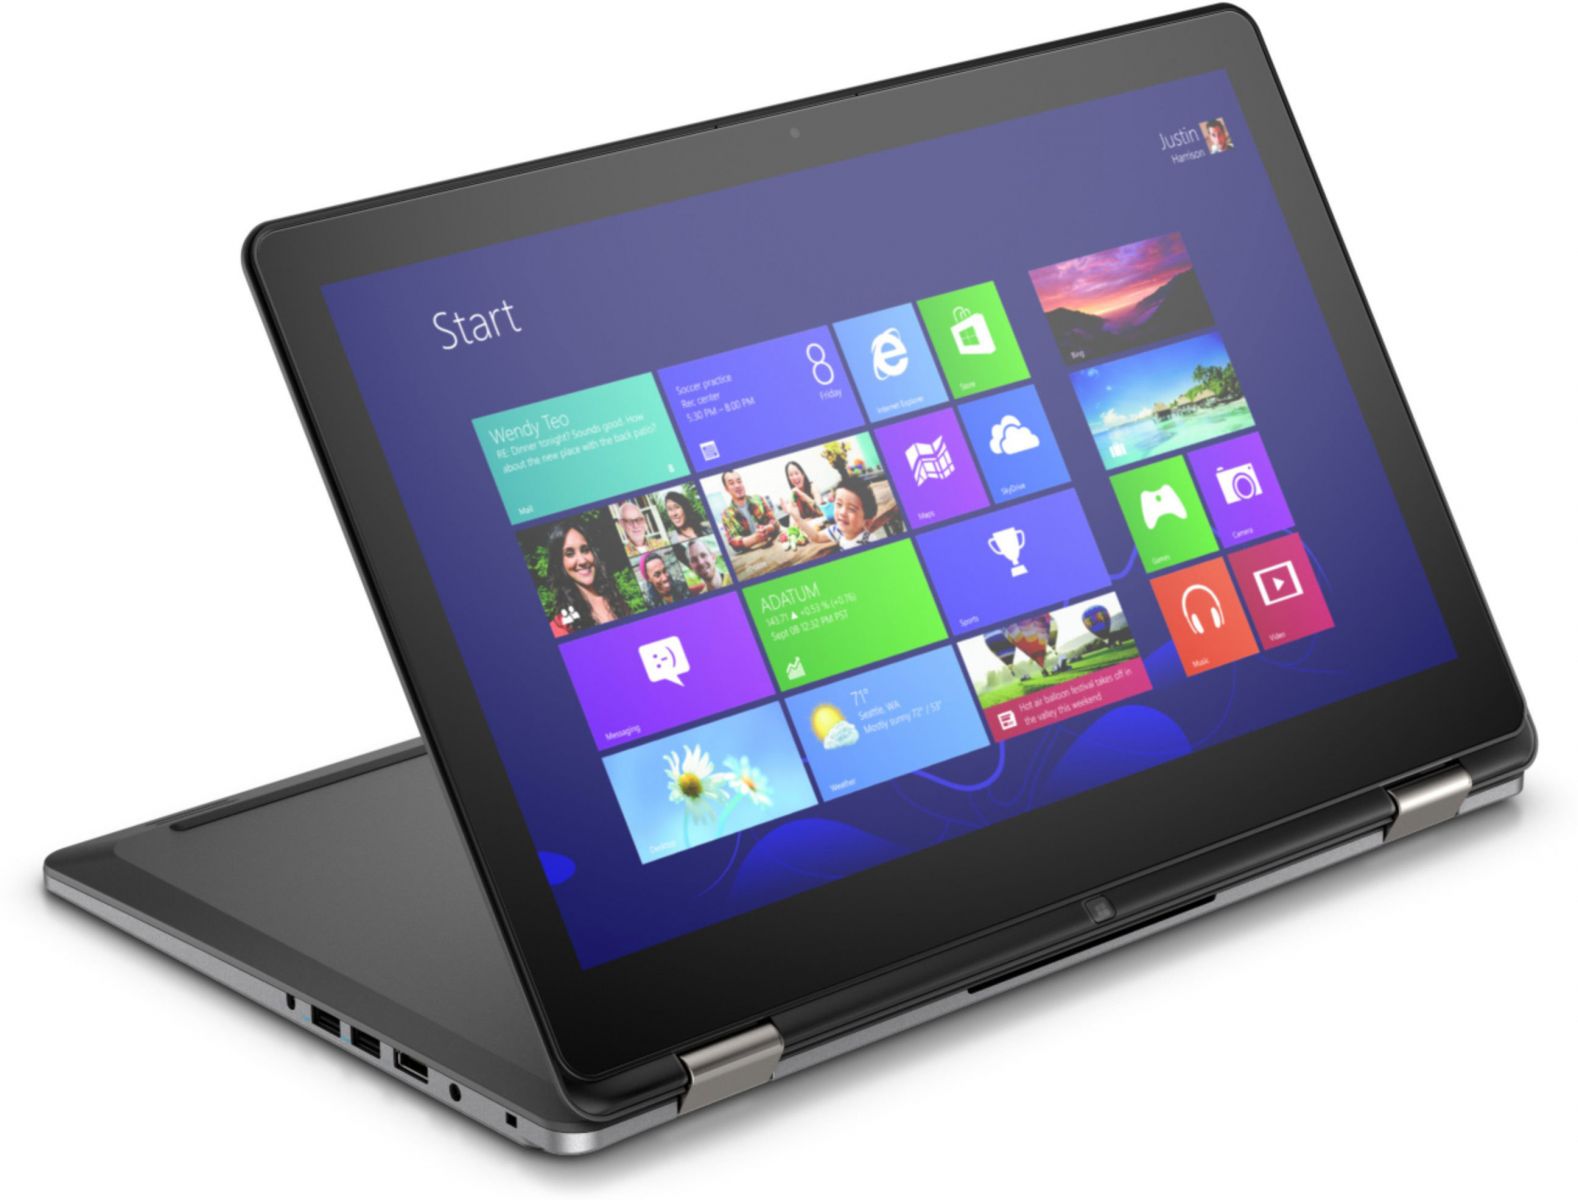 Dell Inspiron 15 7000 series 2-in-1